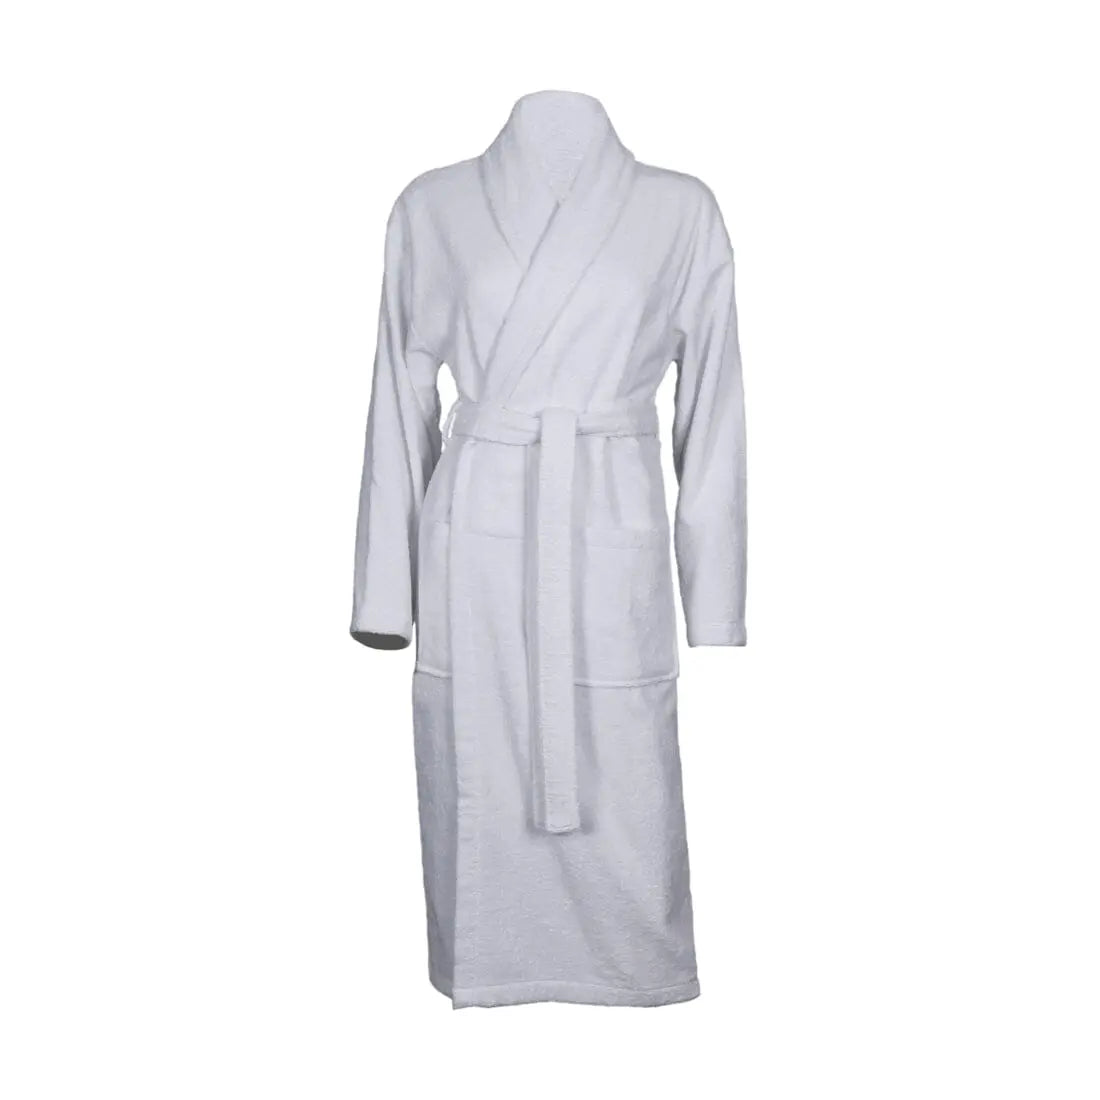 Personalised Back of Robe Cotton Shawl Collar Bathrobe 400gsm Boutique - White Small 